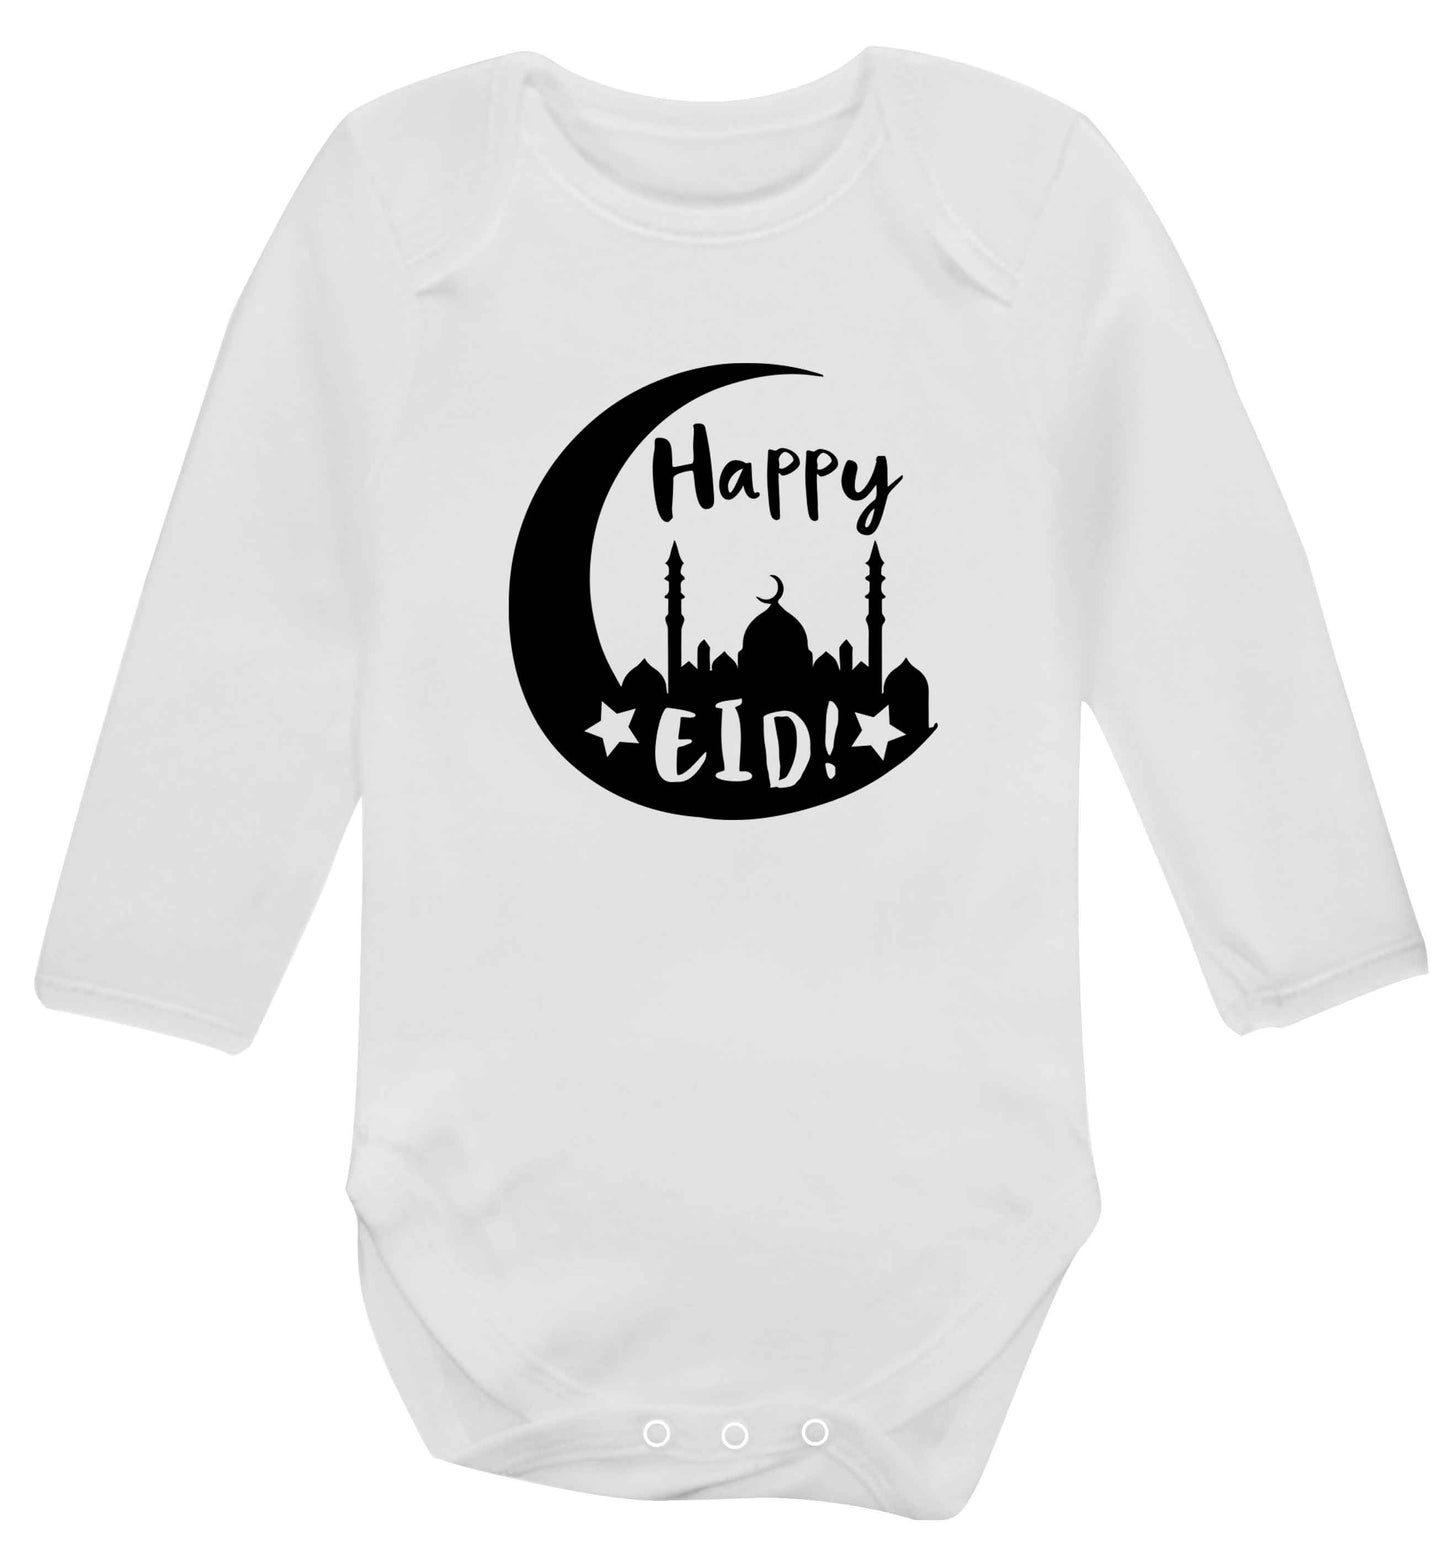 Happy Eid baby vest long sleeved white 6-12 months